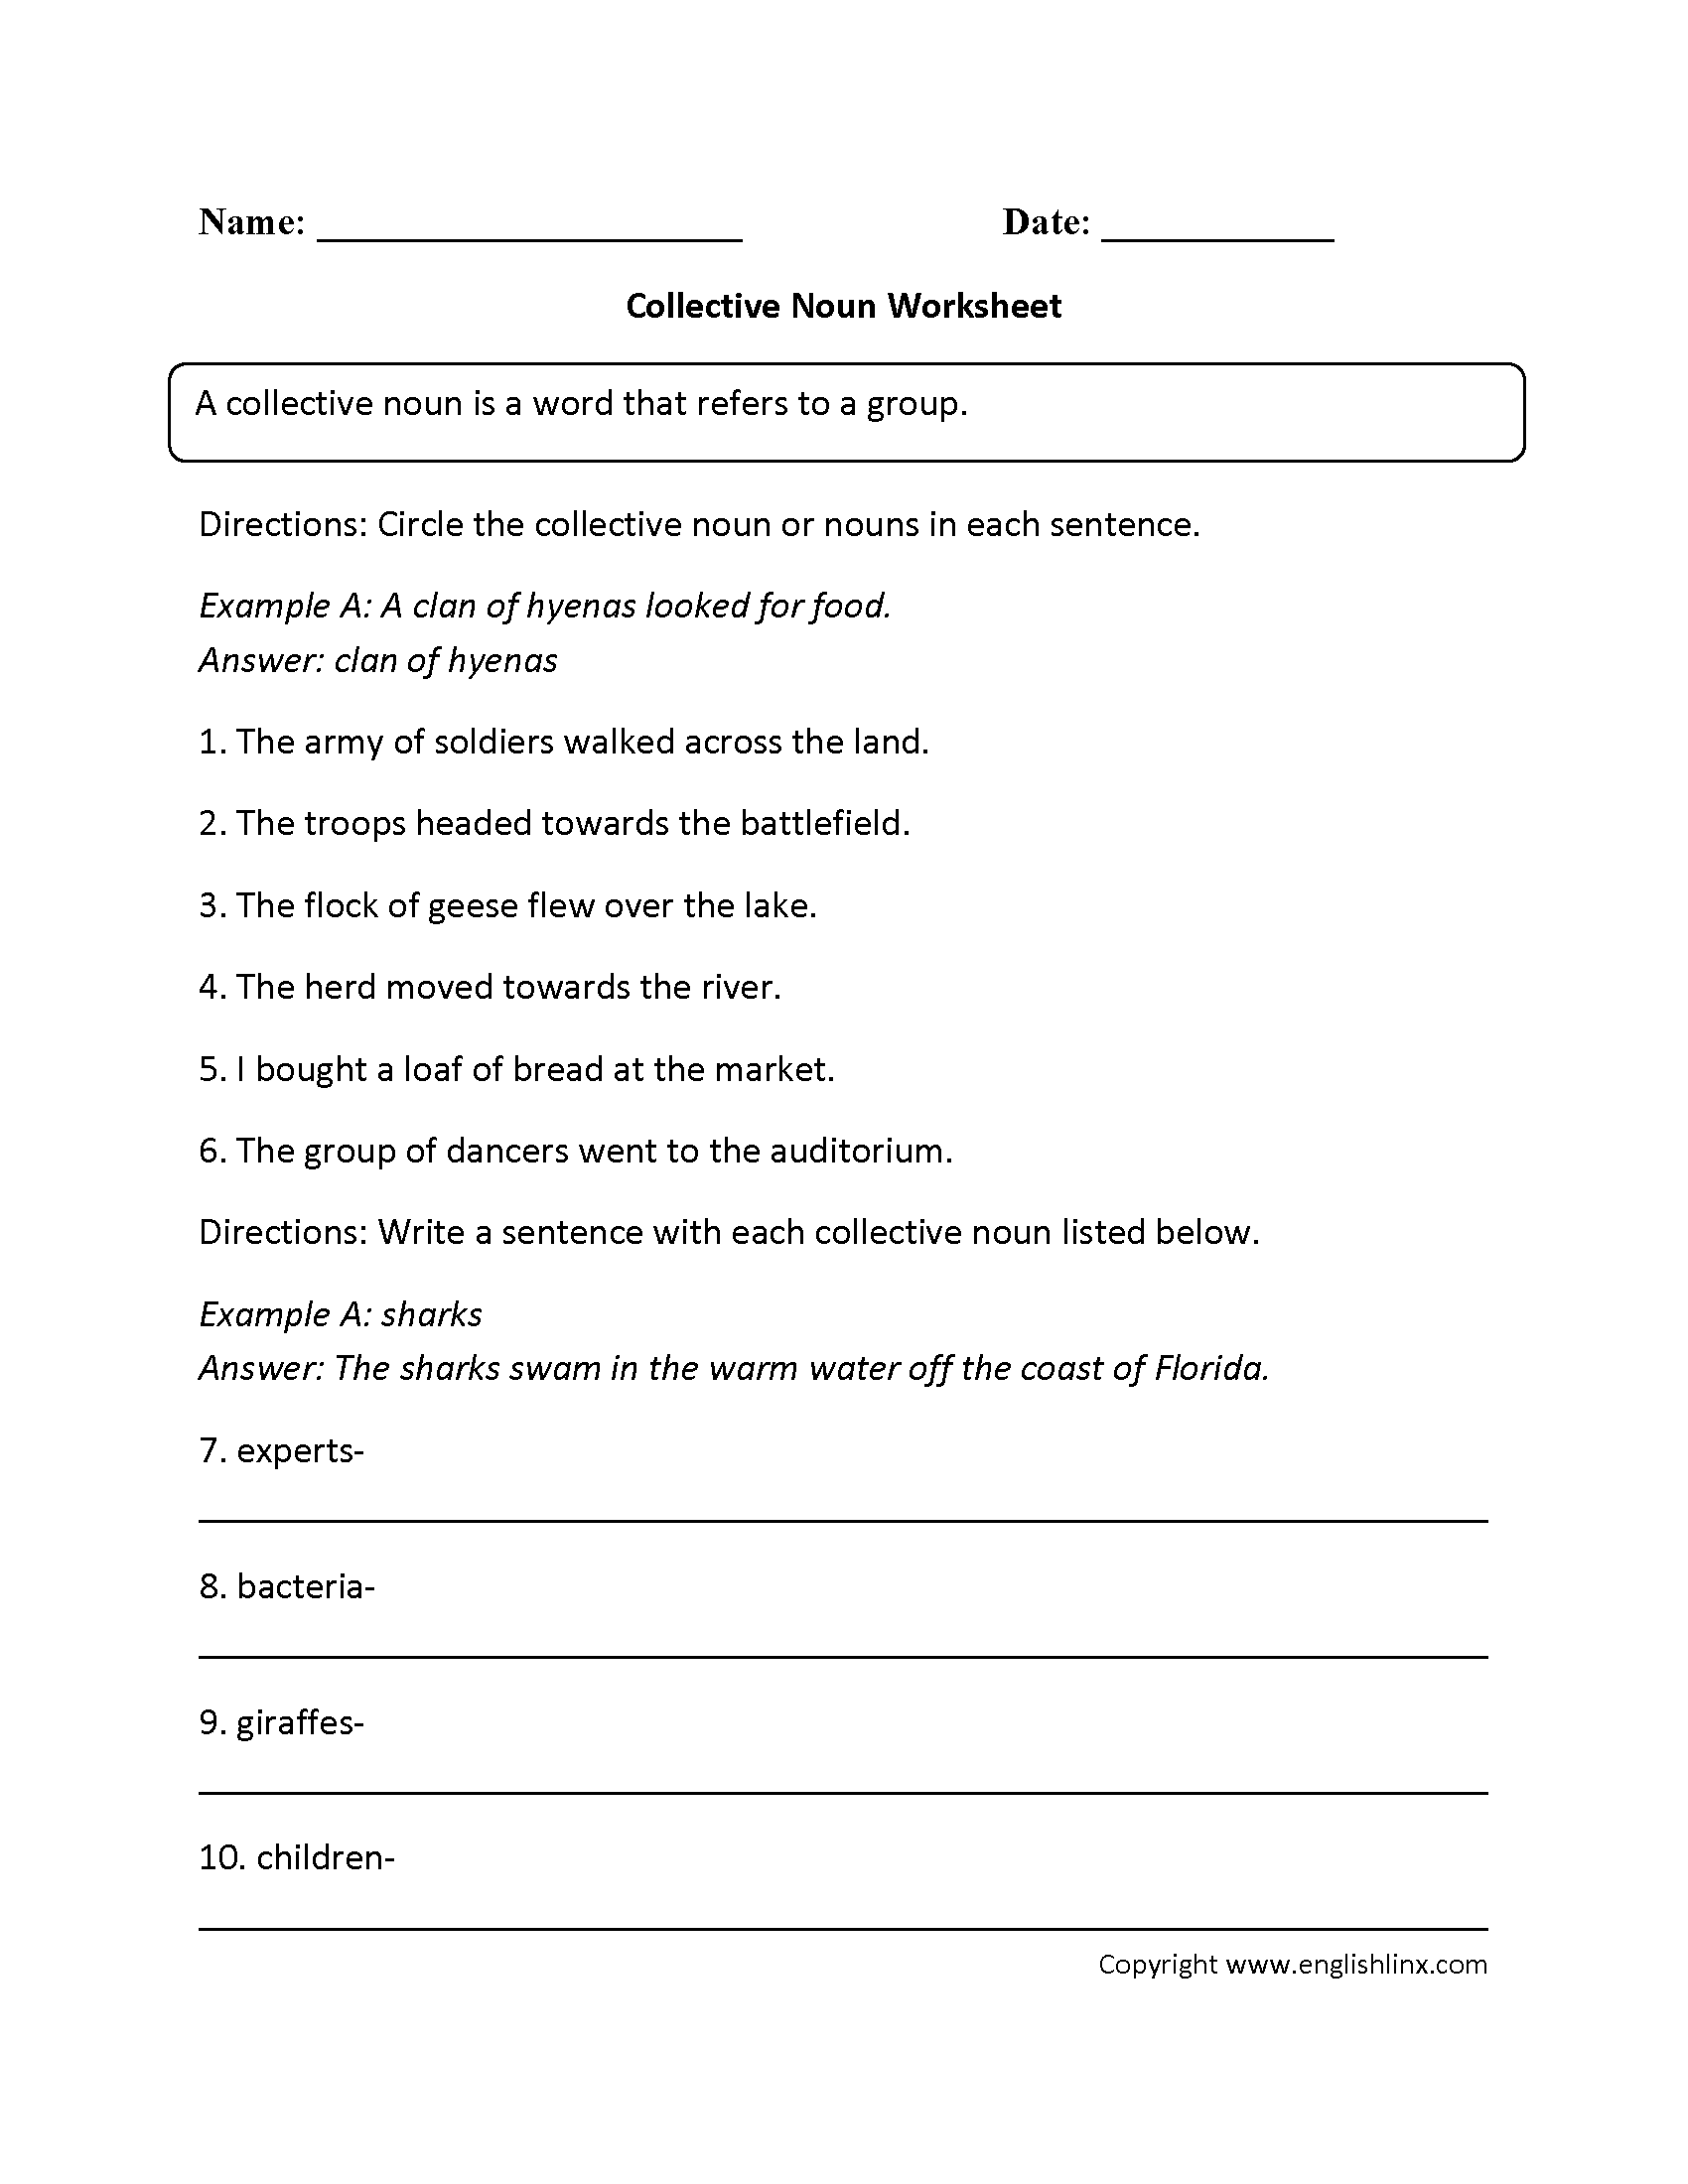 Collective Nouns Worksheet